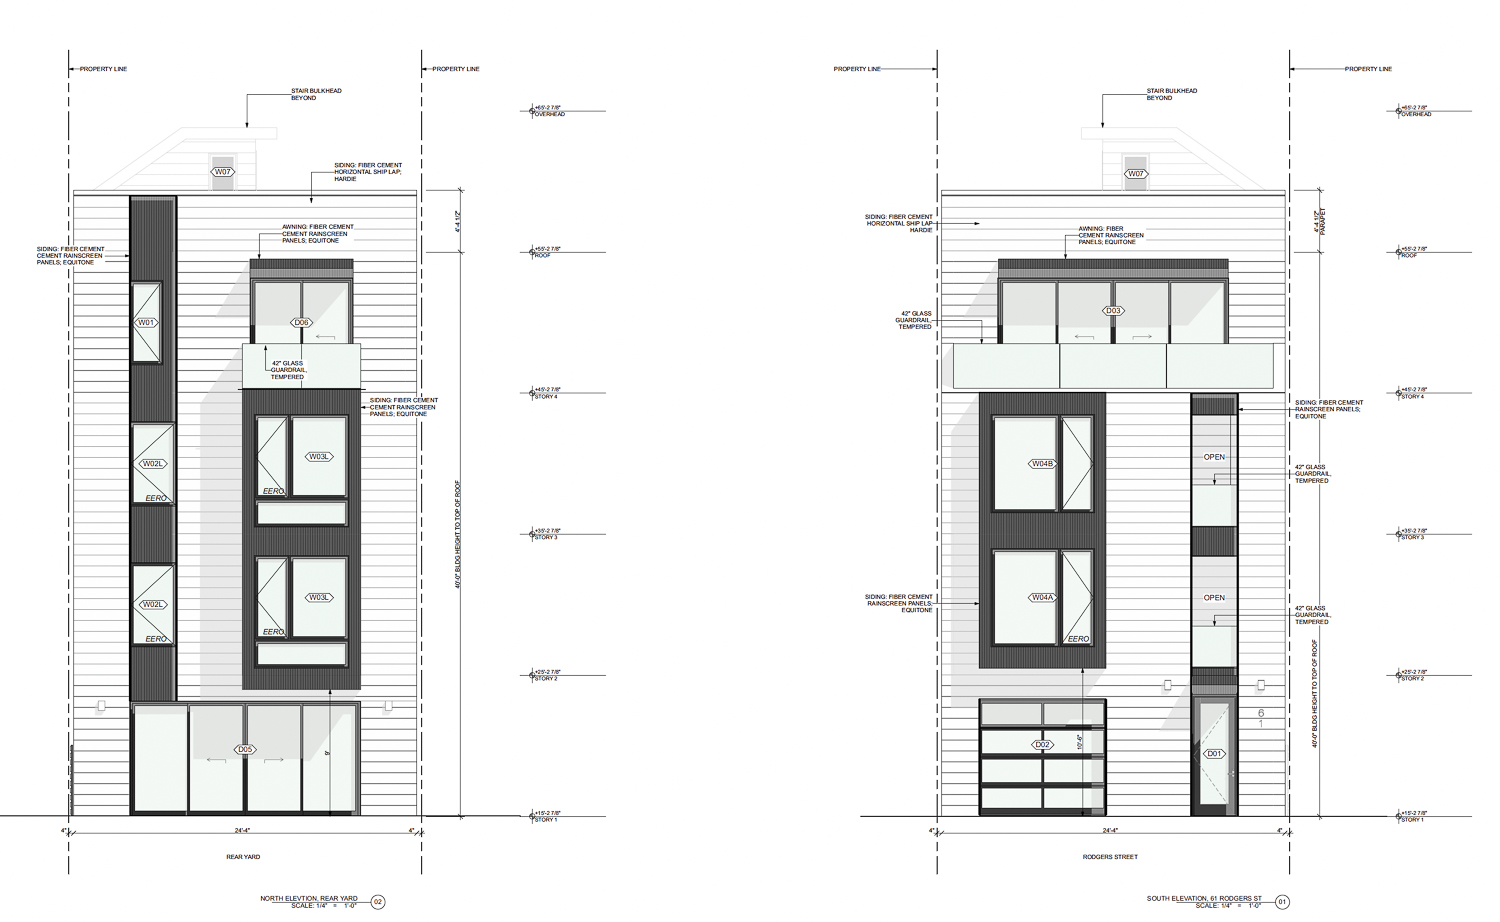 61 Rodgers Street facade elevation, illustration by RG Architecture